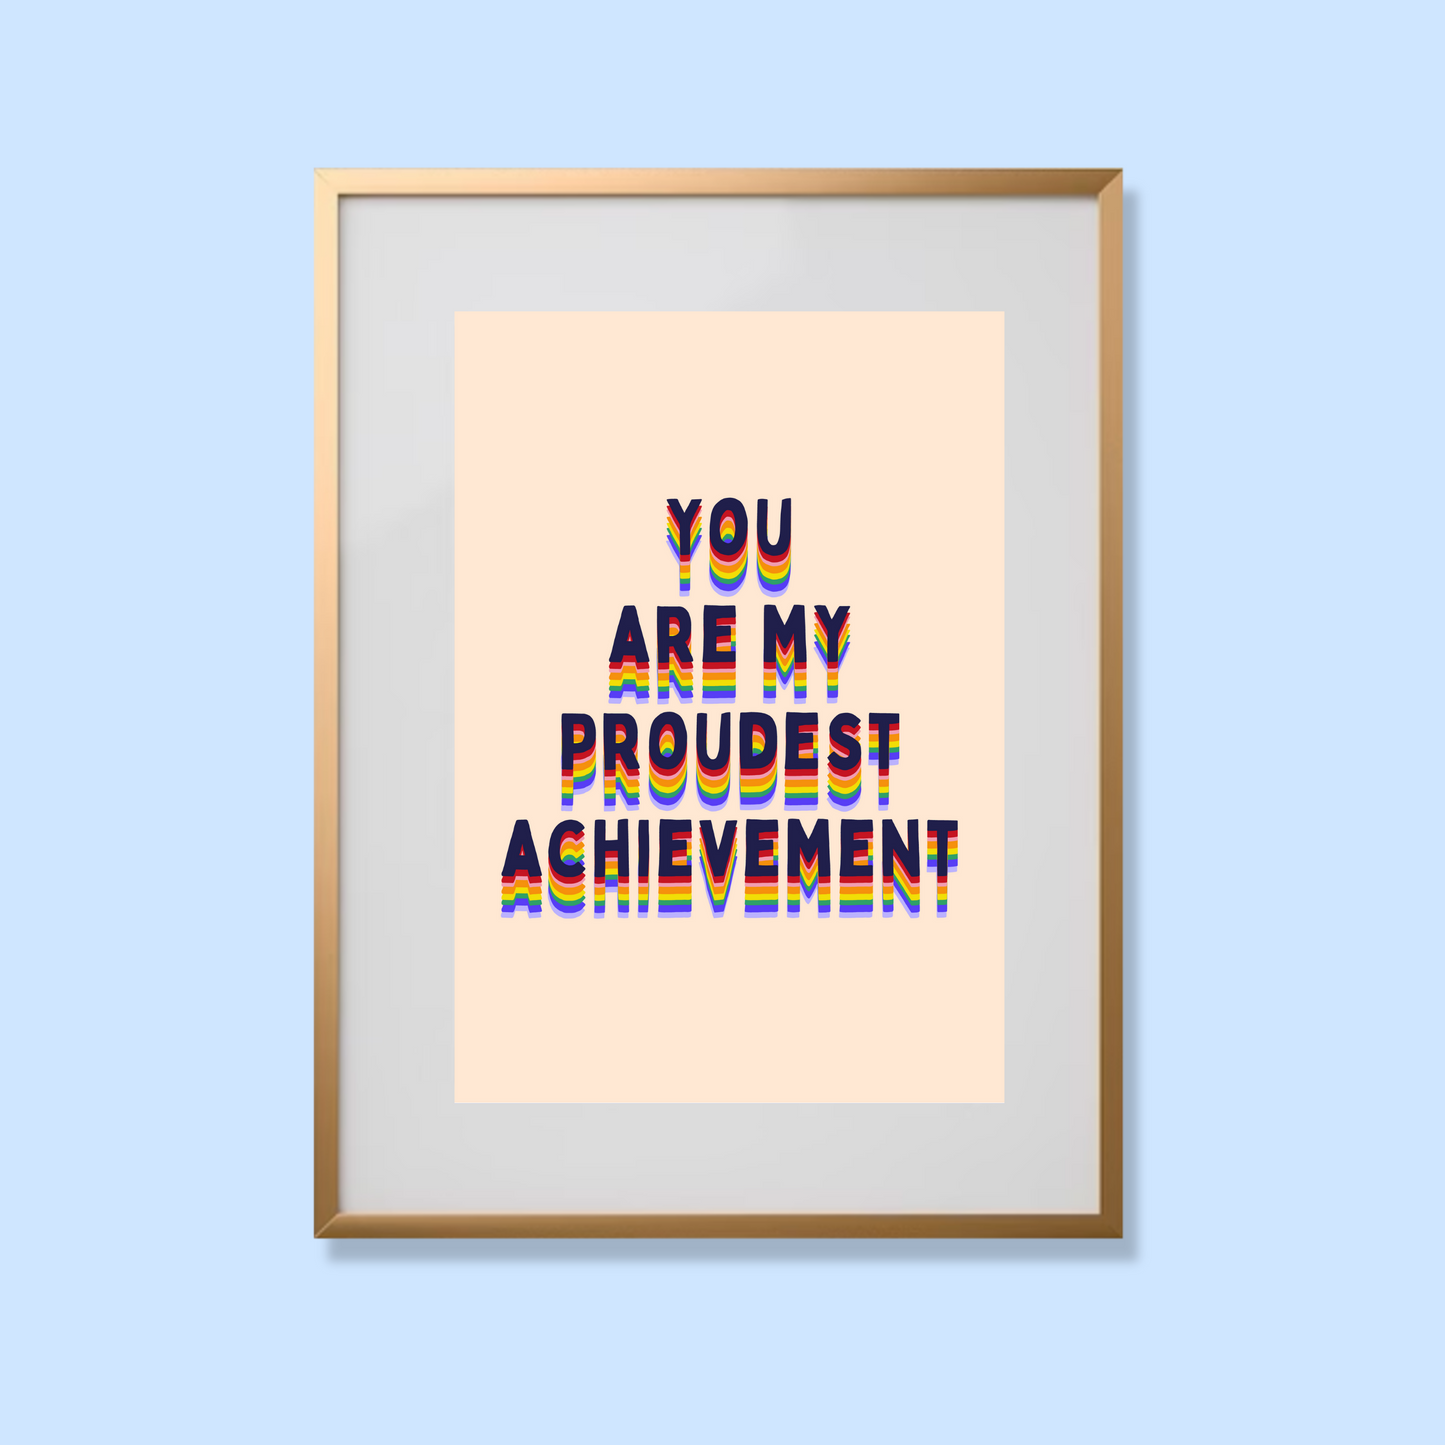 You are my proudest achievement